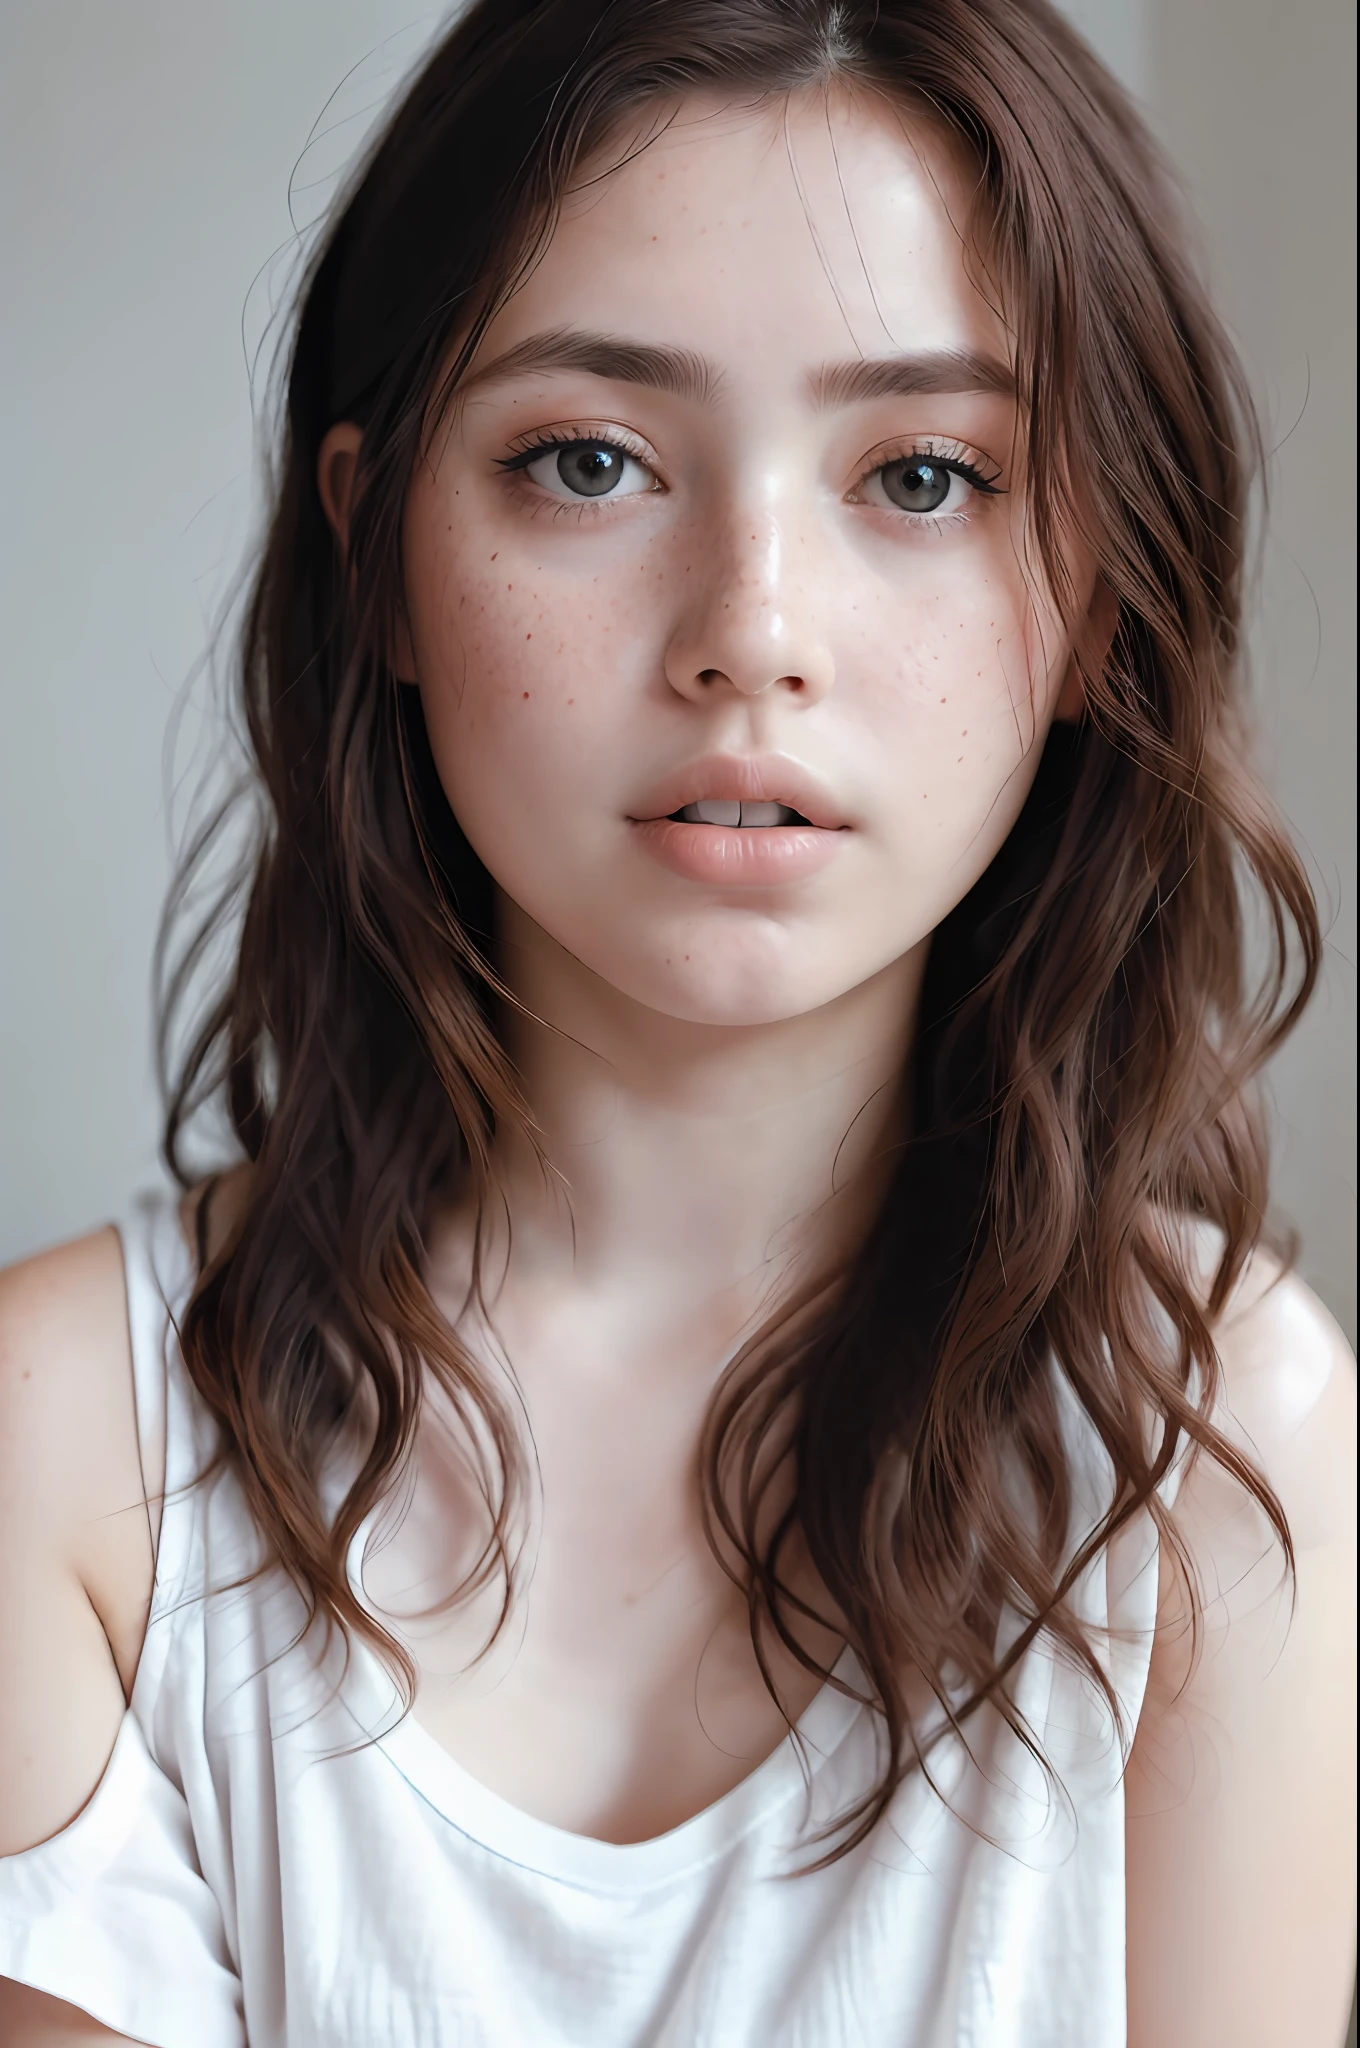 detailed and realistic portrait of a woman with a few freckles, round eyes and short messy hair shot outside, wearing a white t shirt, staring at camera, chapped lips, soft natural lighting, portrait photography, magical photography, dramatic lighting, photo realism, ultra-detailed, intimate portrait composition, Leica 50mm, f1. 4